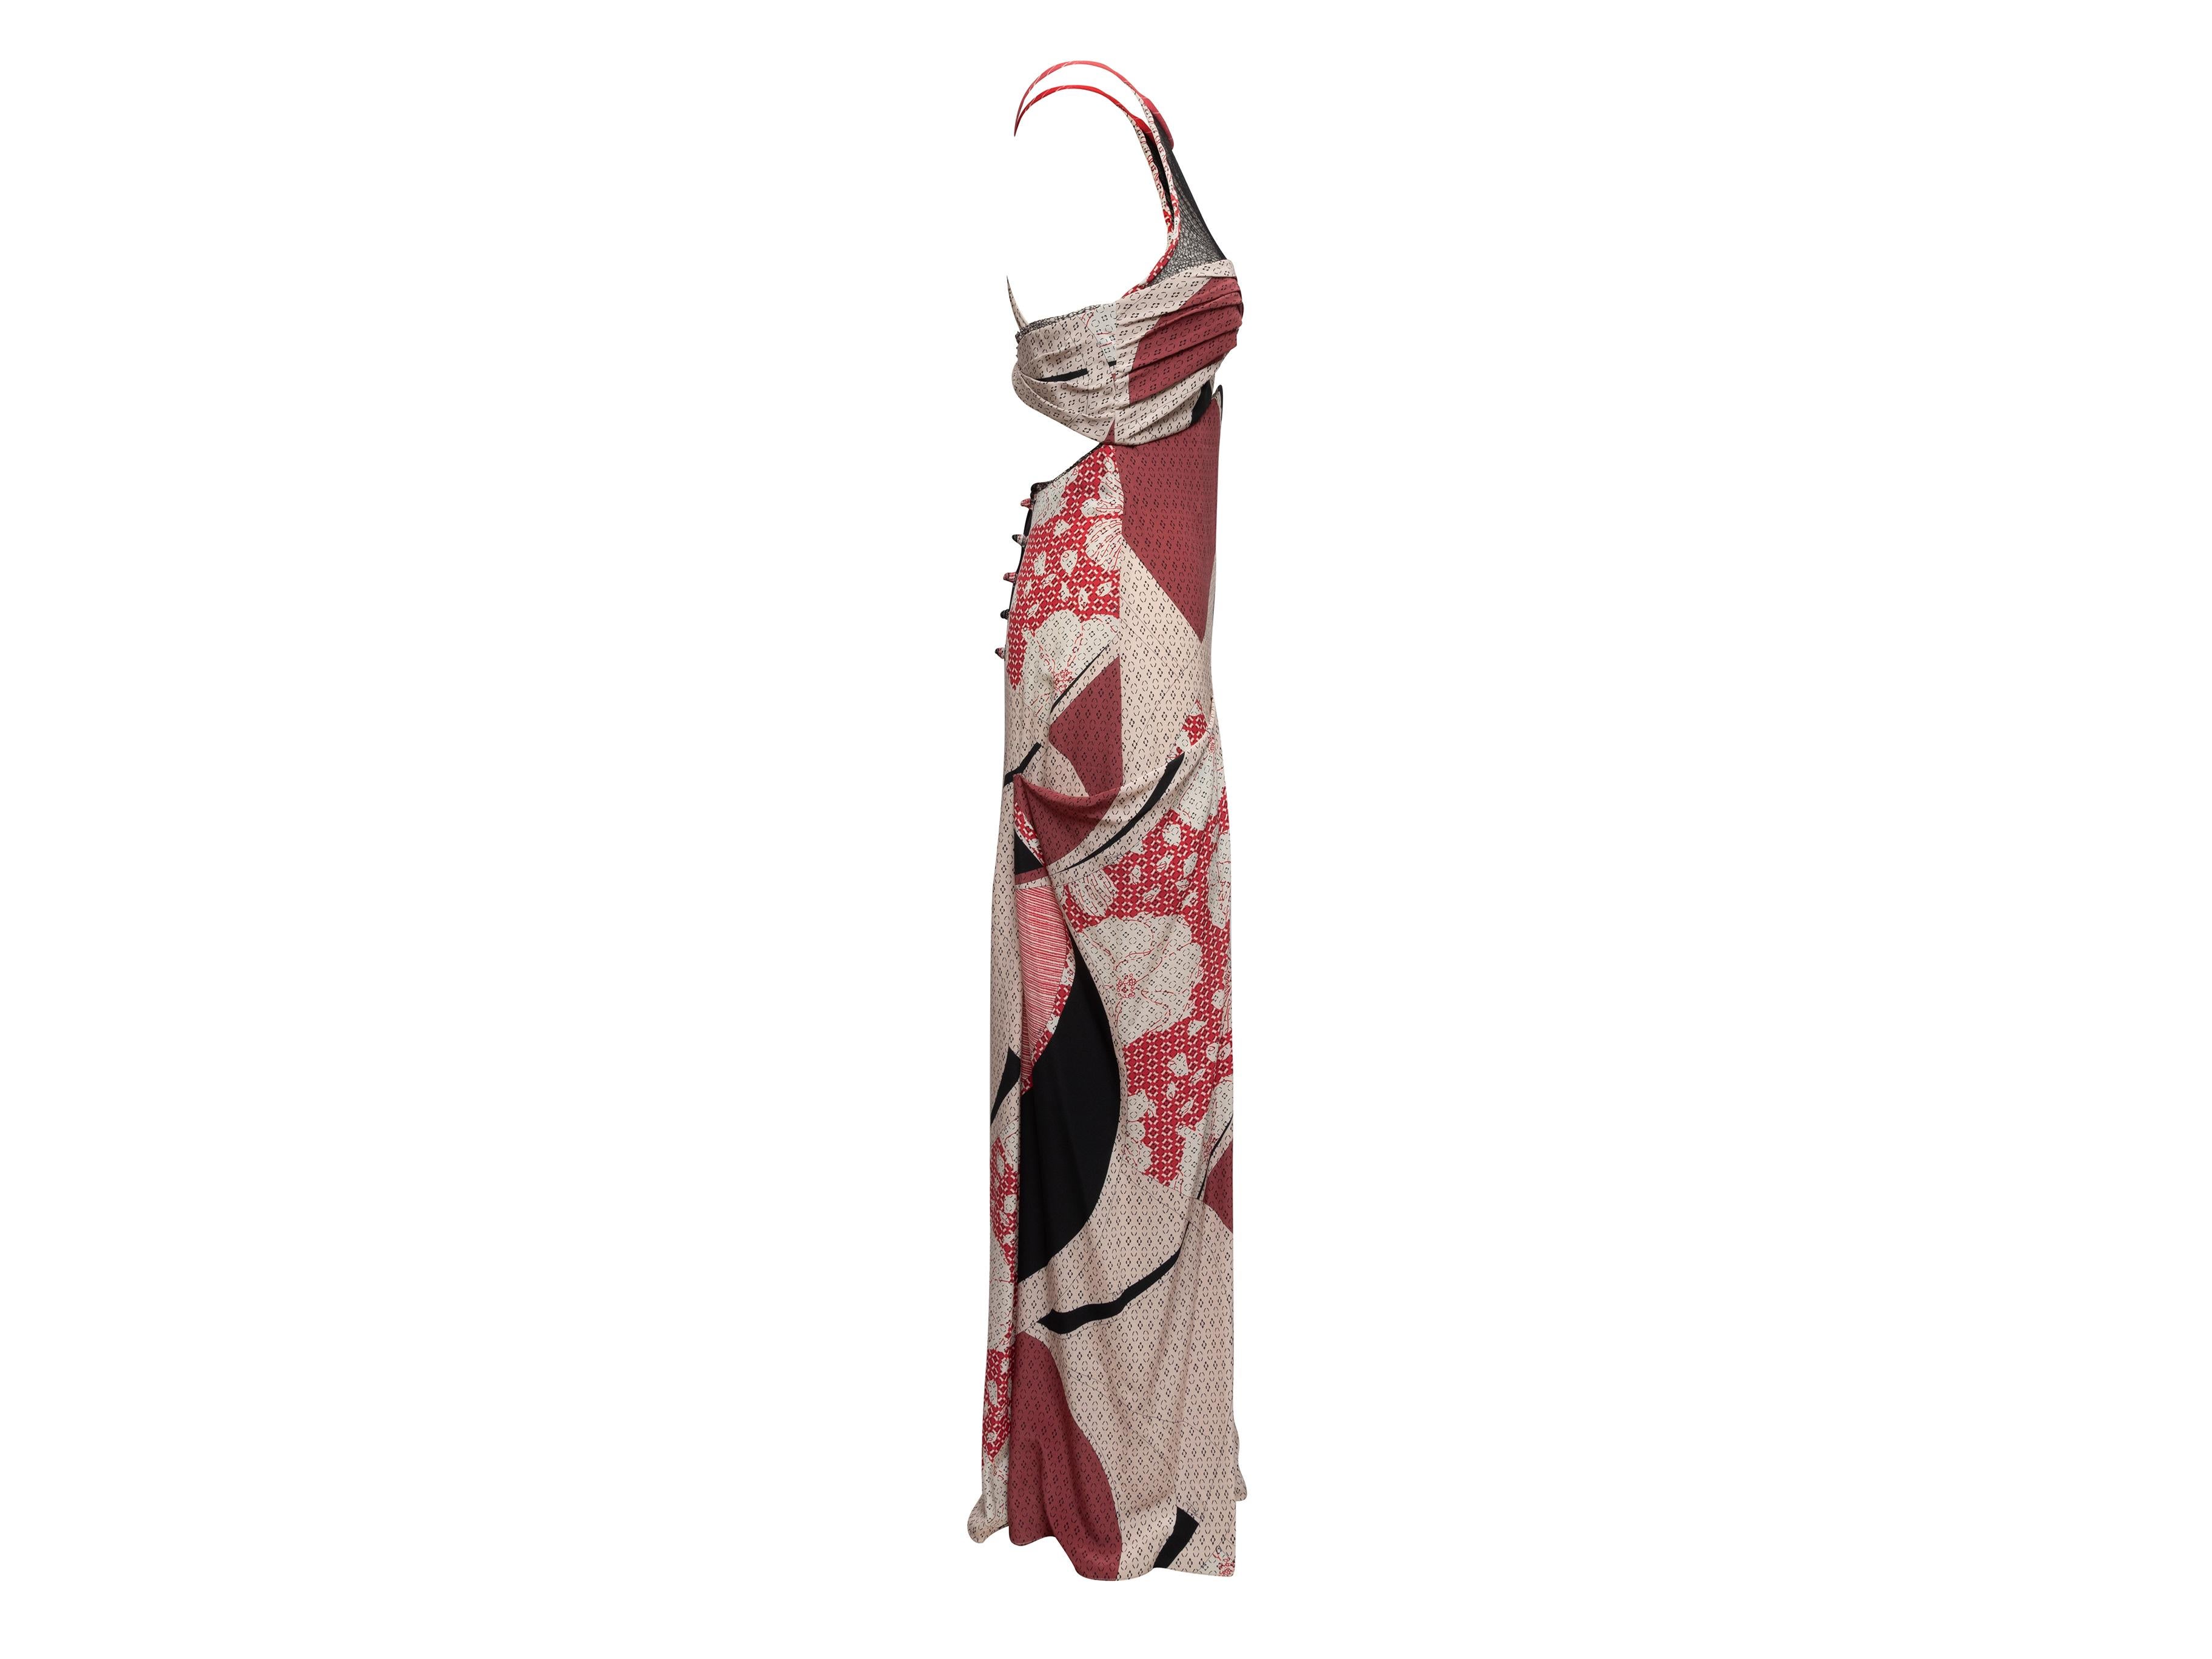 Product Details: White and multicolor silk printed maxi dress by Emilio Pucci. From the Spring/Summer 2013 Collection. Halter neck. Cutouts at front and back. Button closures at back. 32